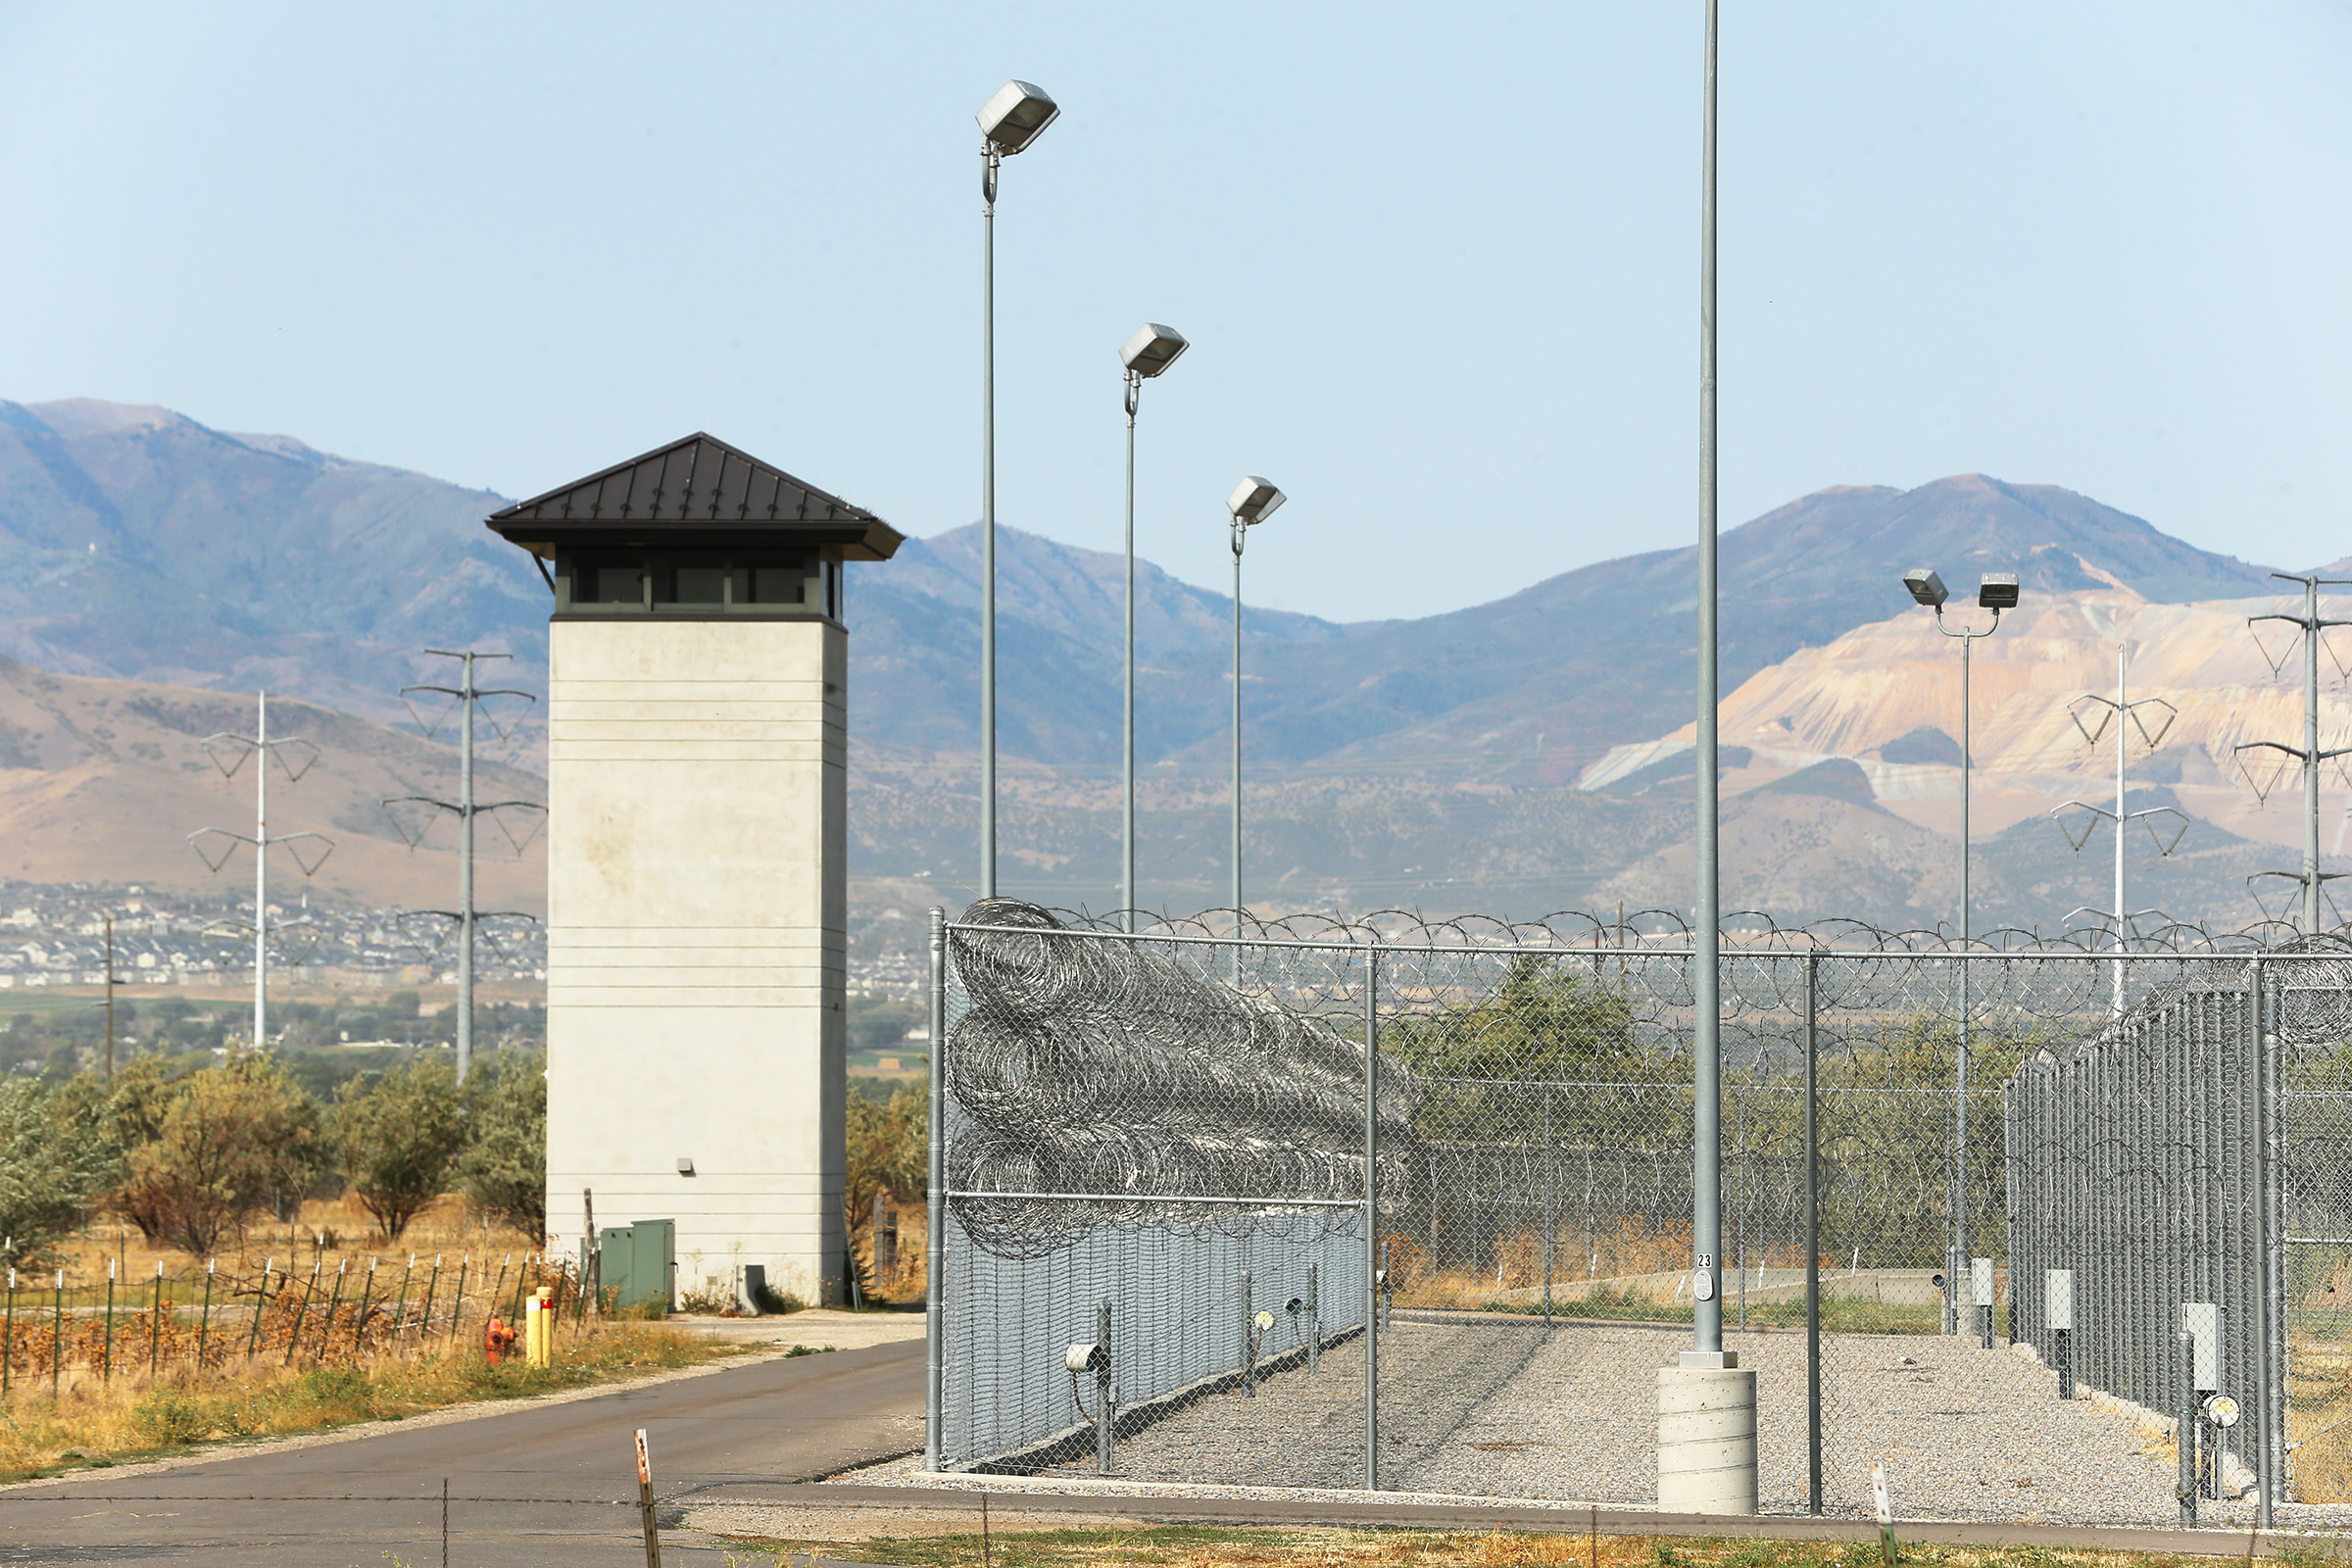 A guard tower at the Utah State Prison on Monday, Sept. 14, 2020.